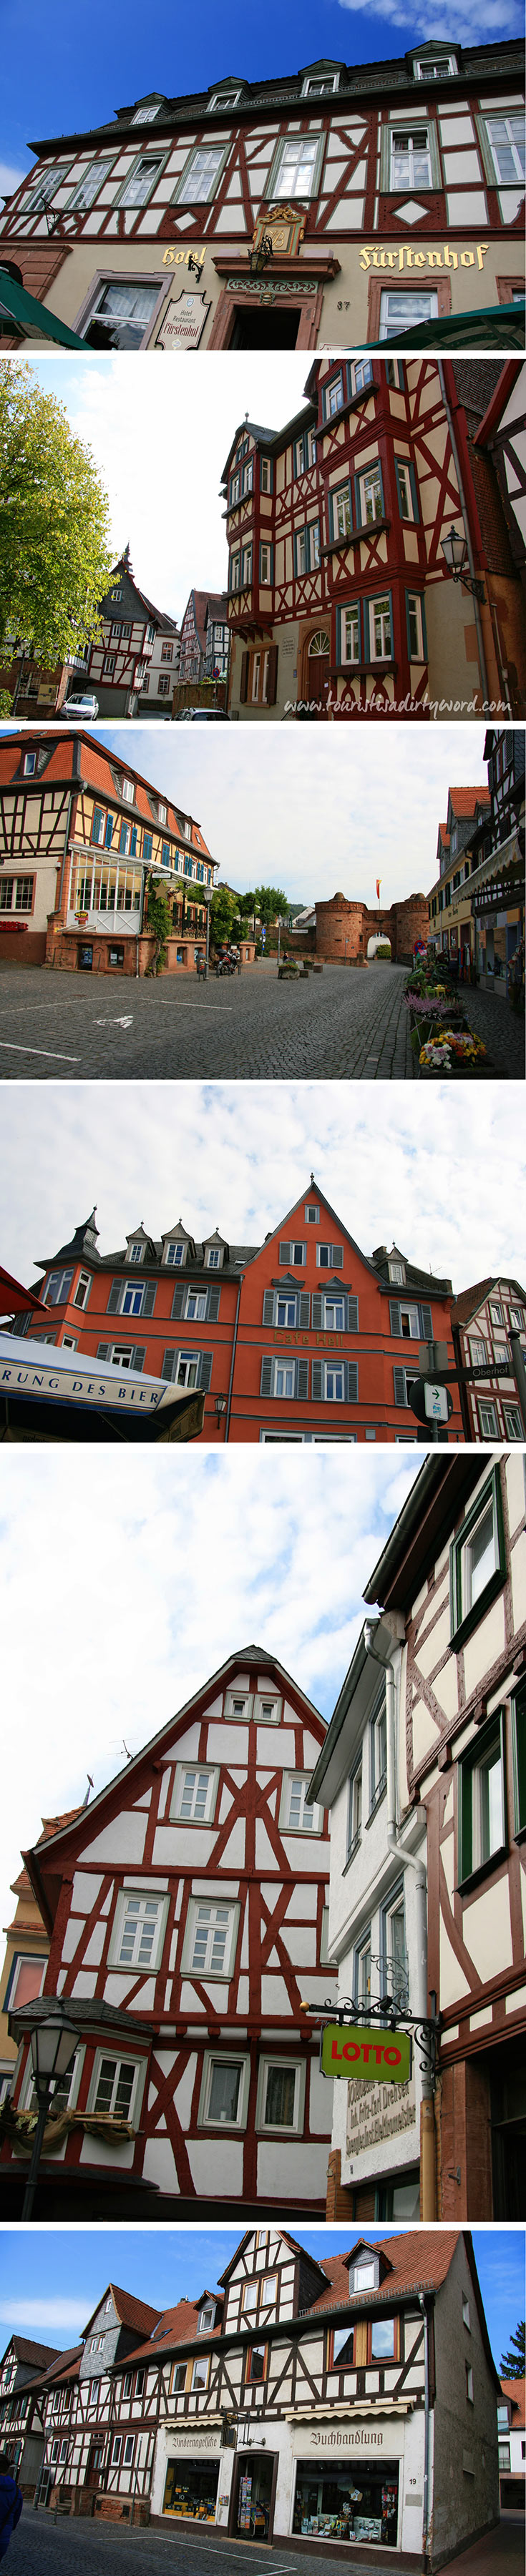 Discover the Half-timbered Houses in Buedingen, Germany